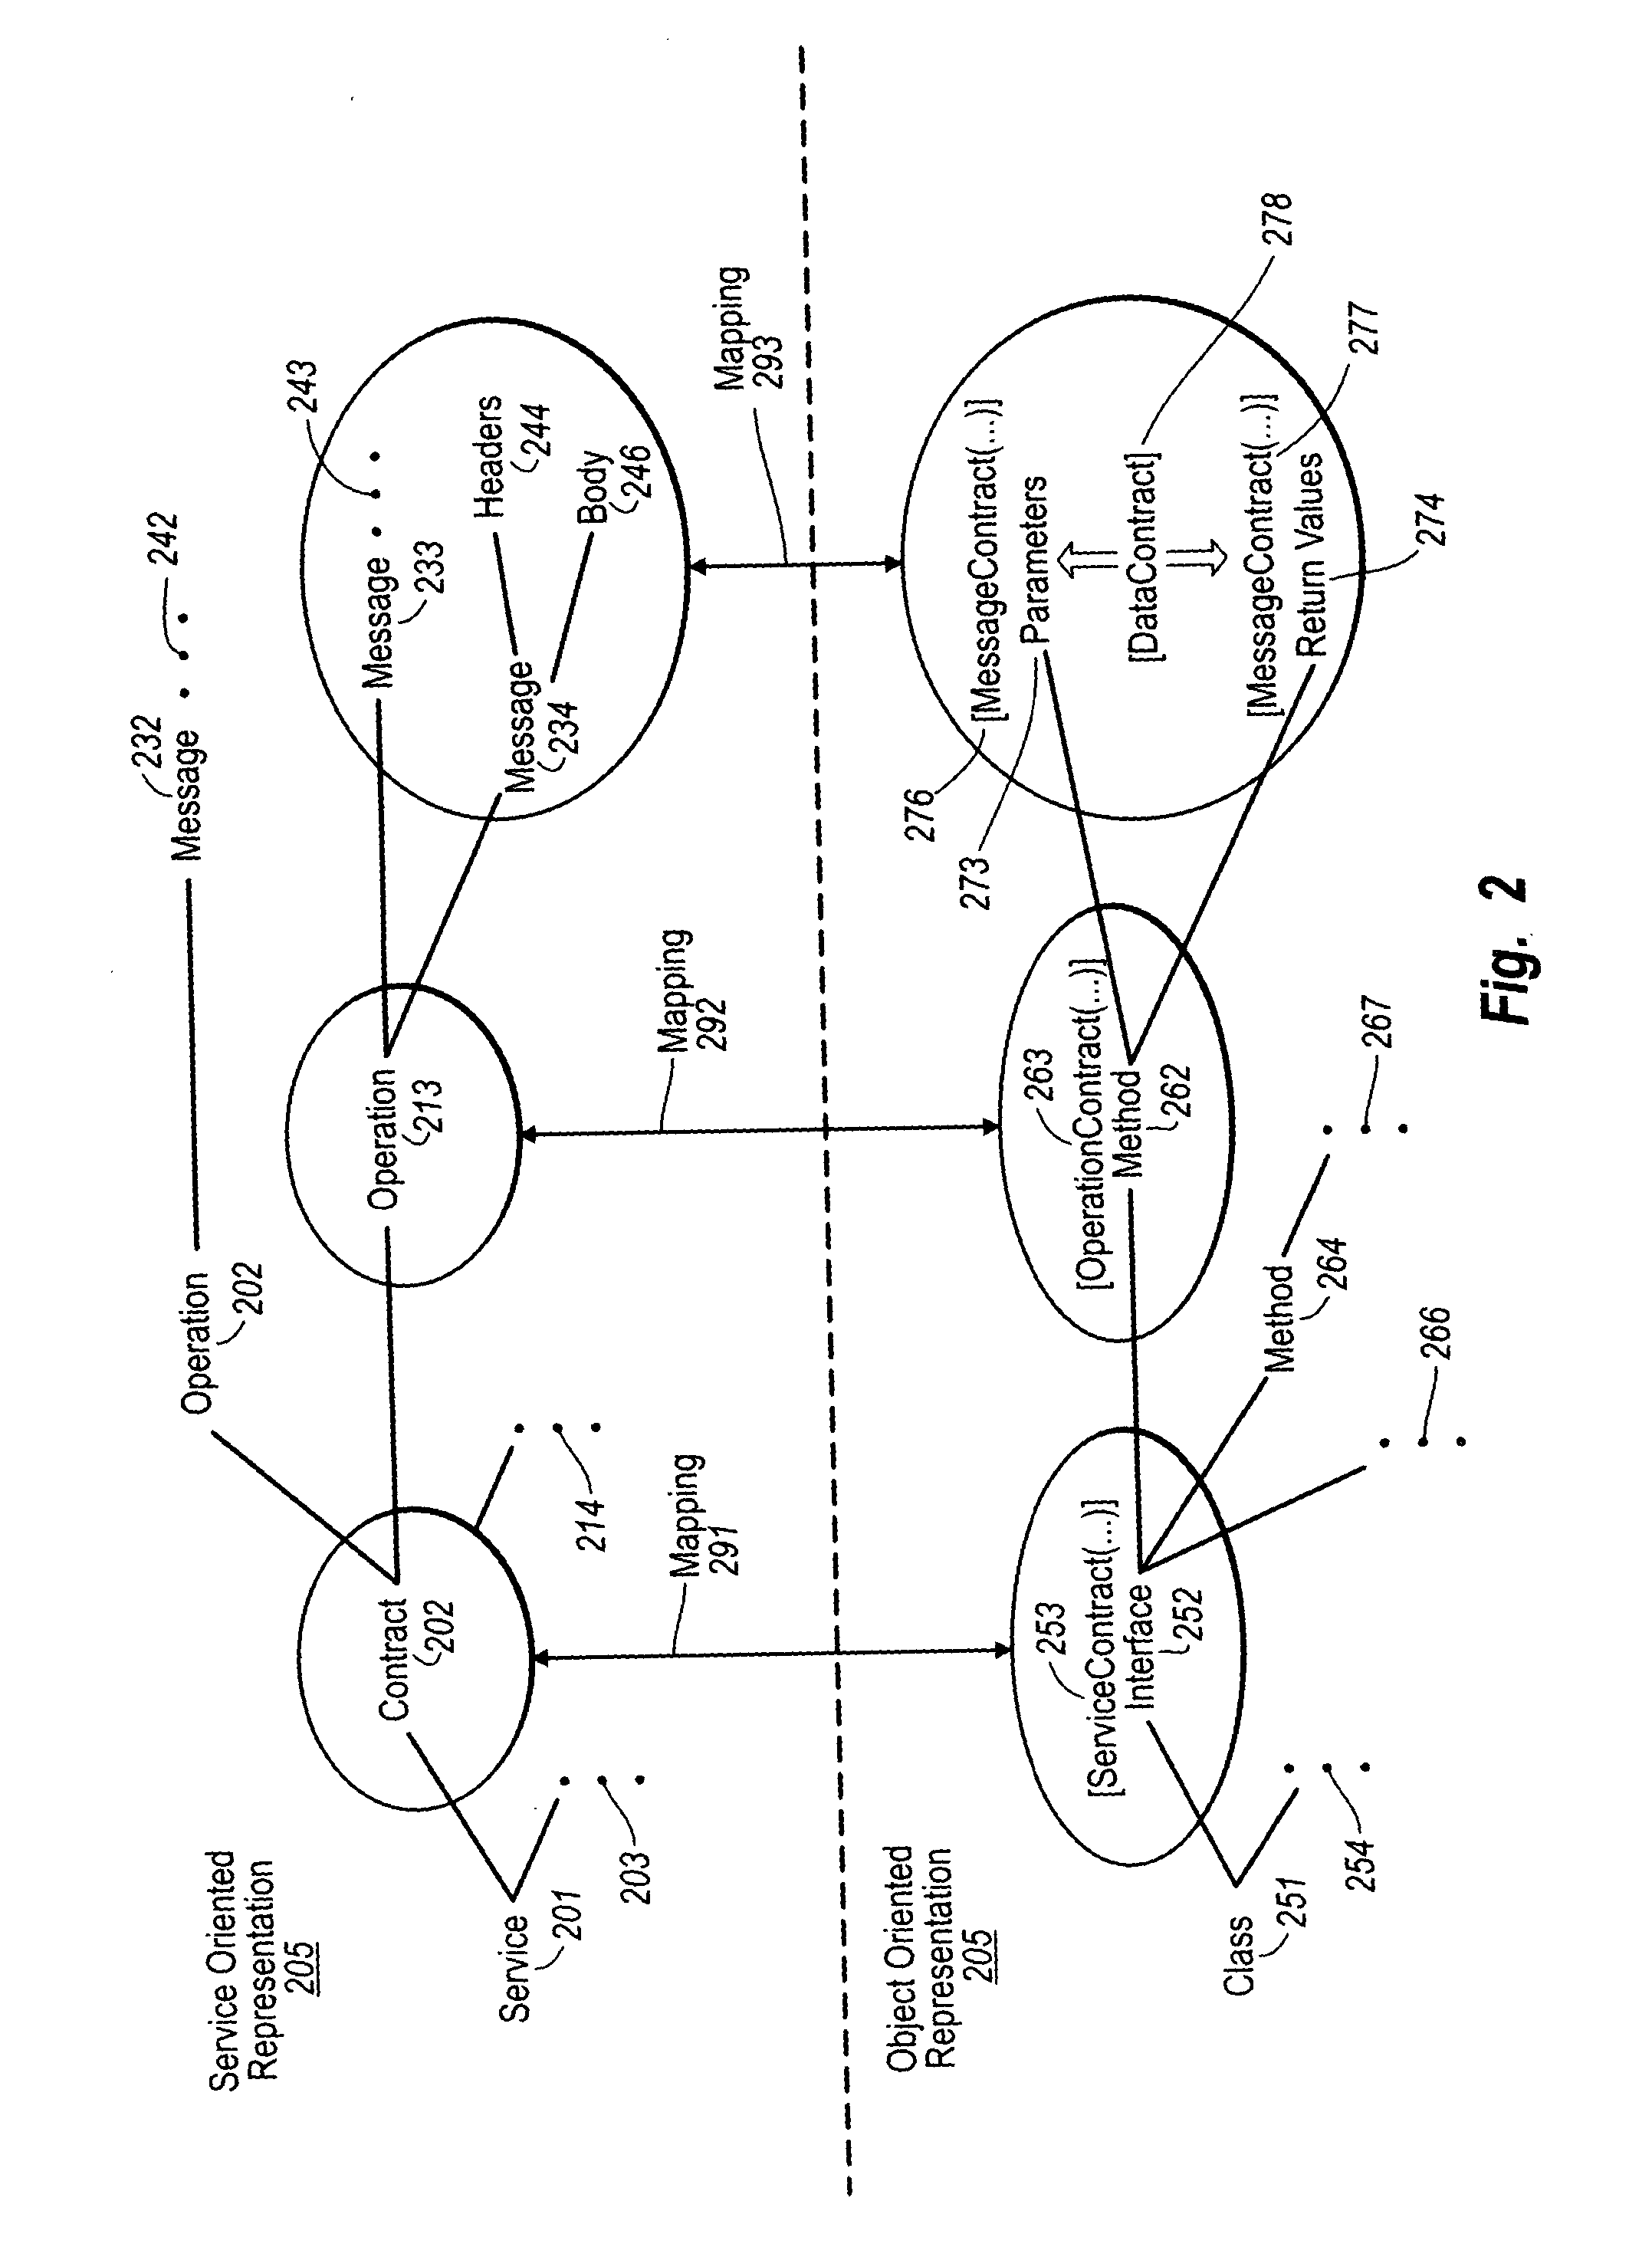 Mapping between object oriented and service oriented representations of a distributed application